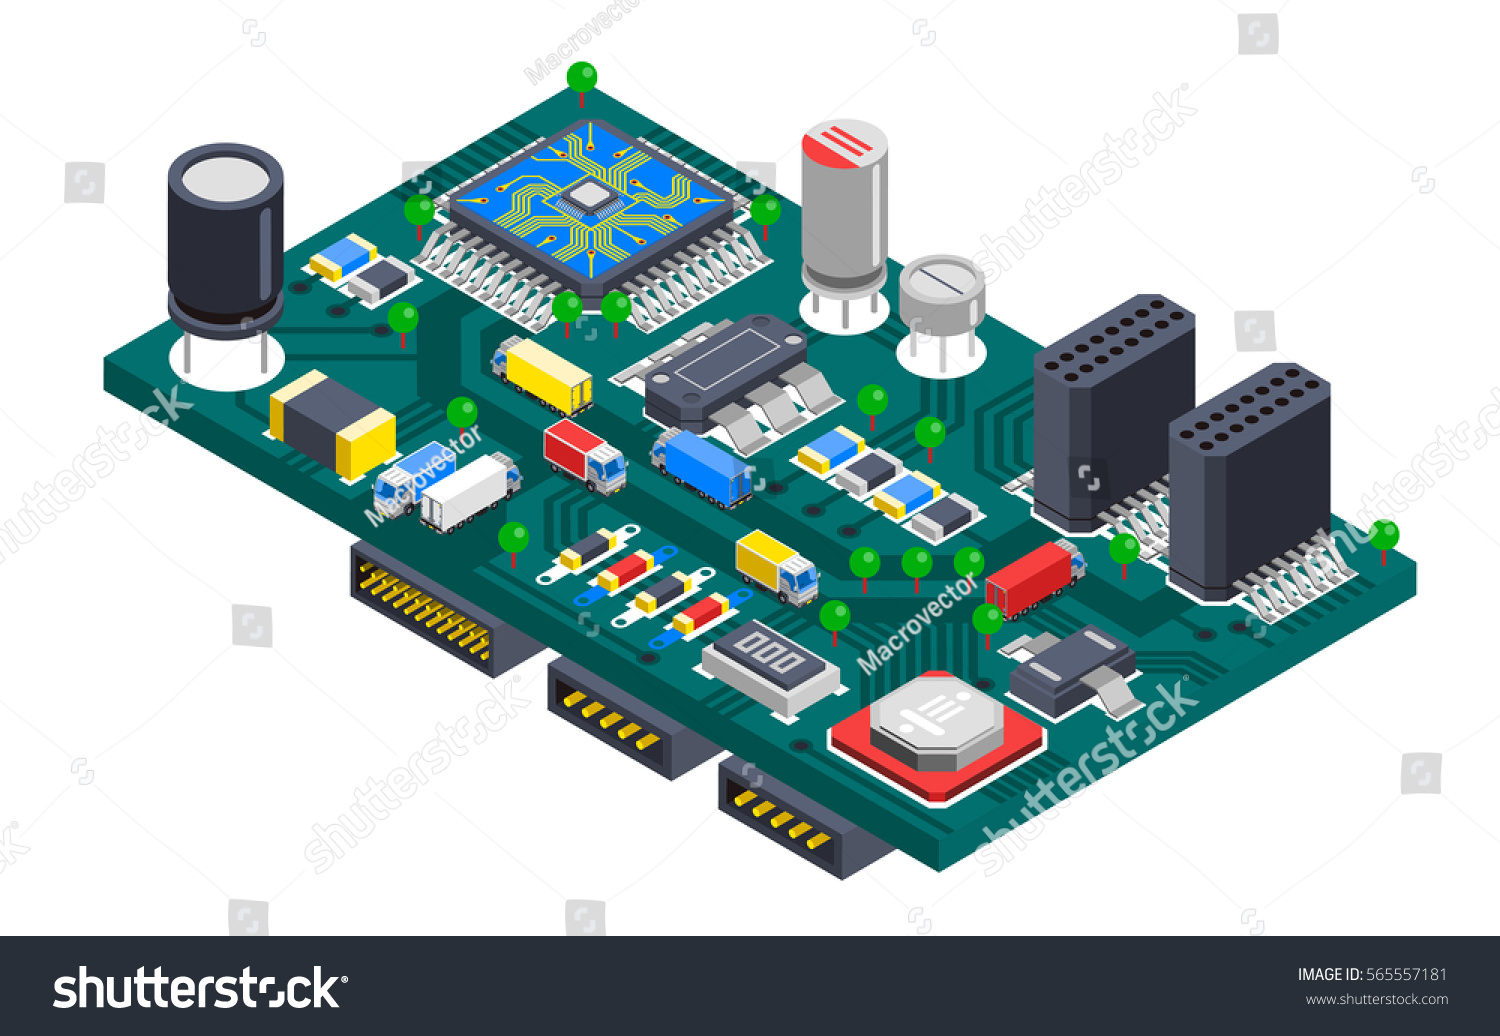 Semiconductor Electronic Circuit Board Isometric Composition Stock ...